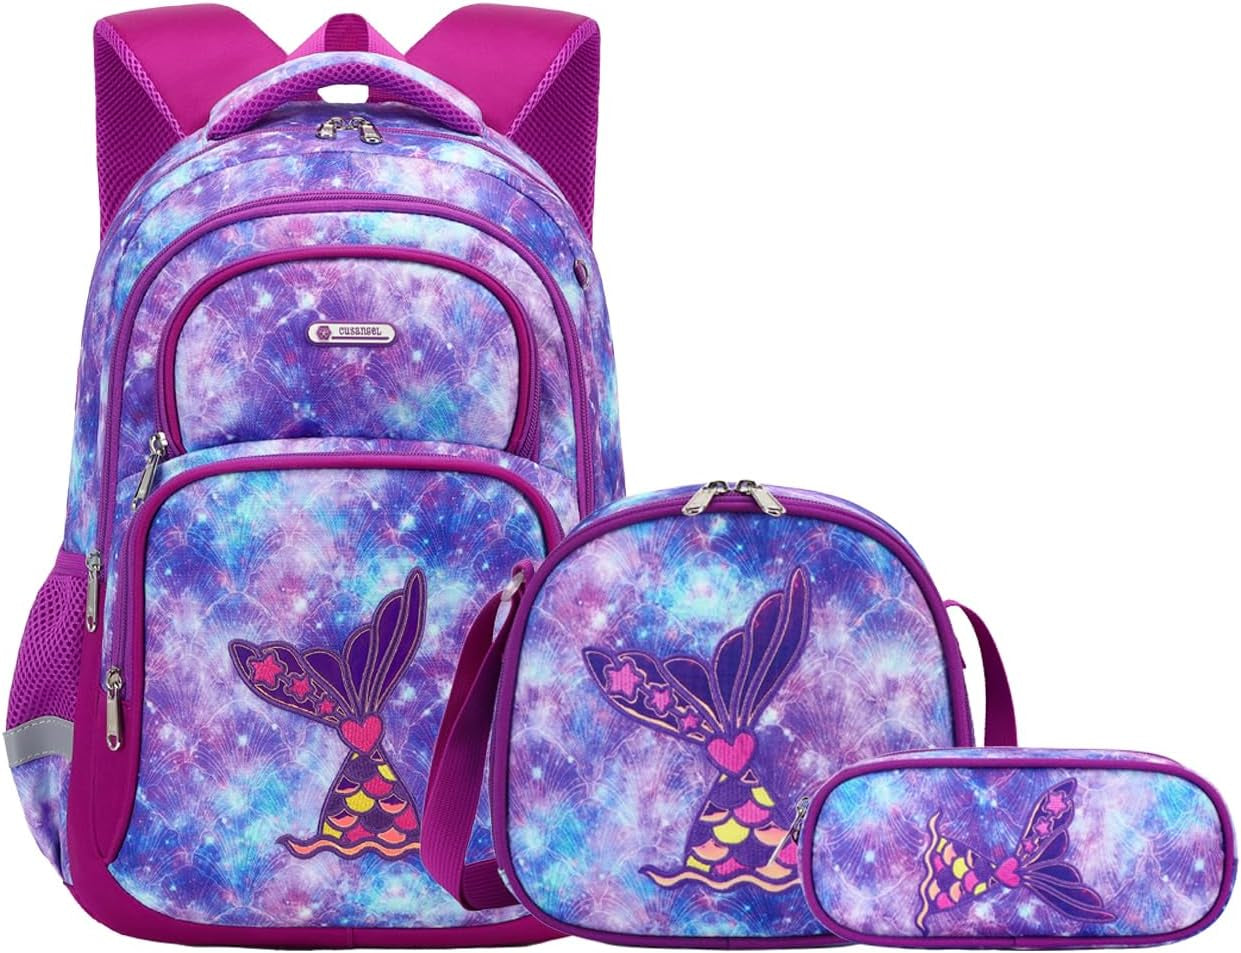 Purple Mermaid 3Pcs Set with Lunch Box Pencil Case,Multi Compartment Backpack, Dinosaur Backpack Chest Strap Side Pockets 16 Inch